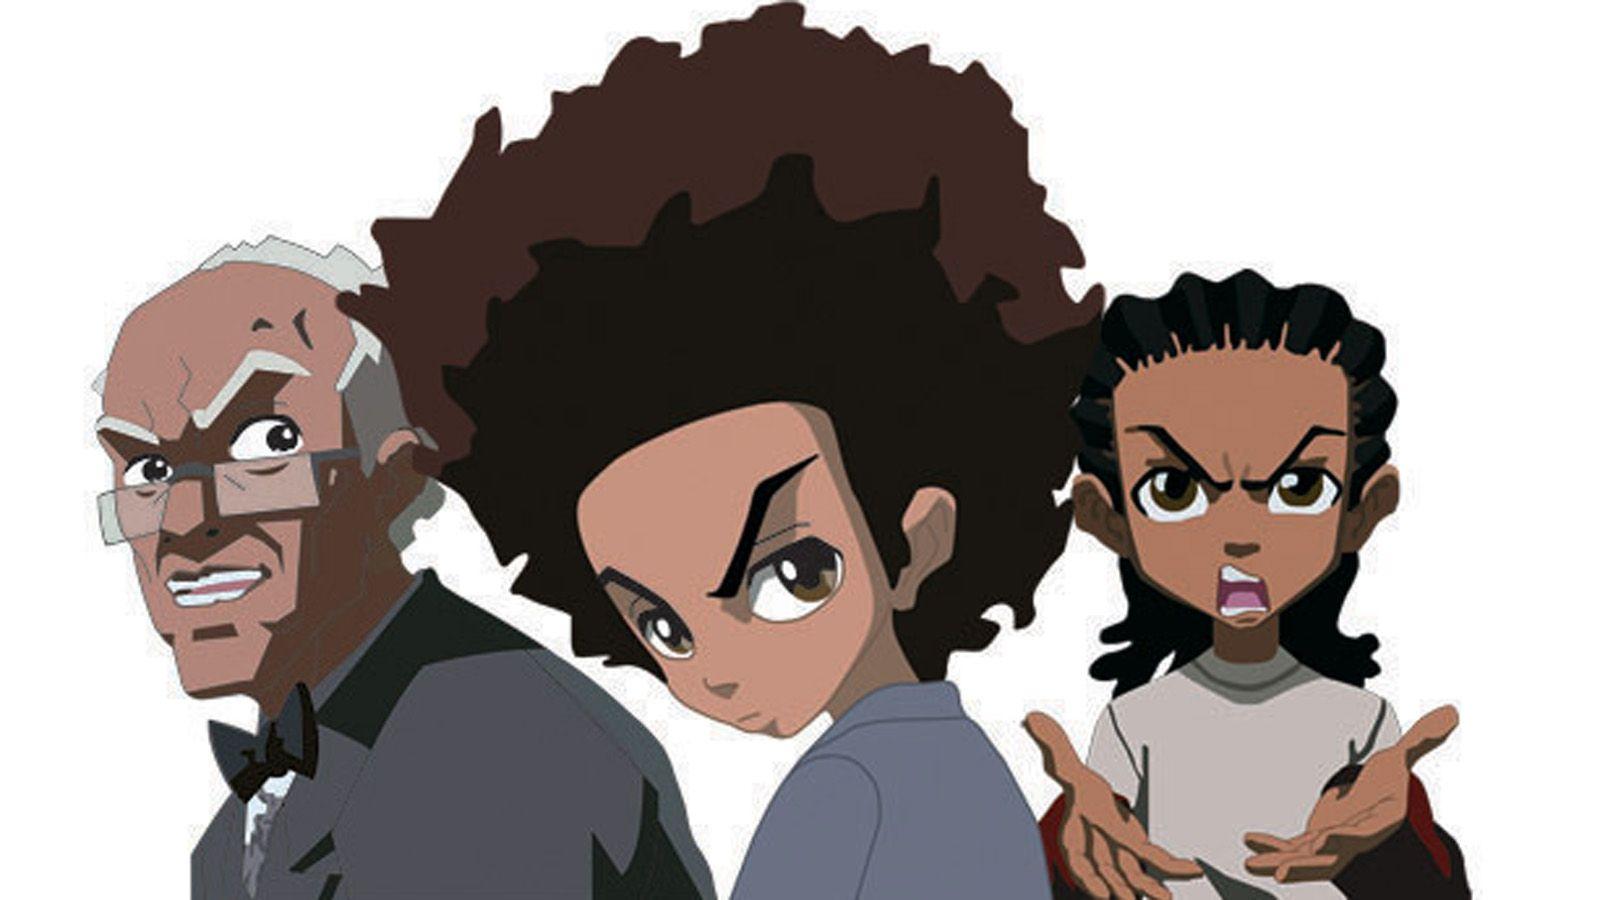 The Boondocks. Sony MAX South Africa